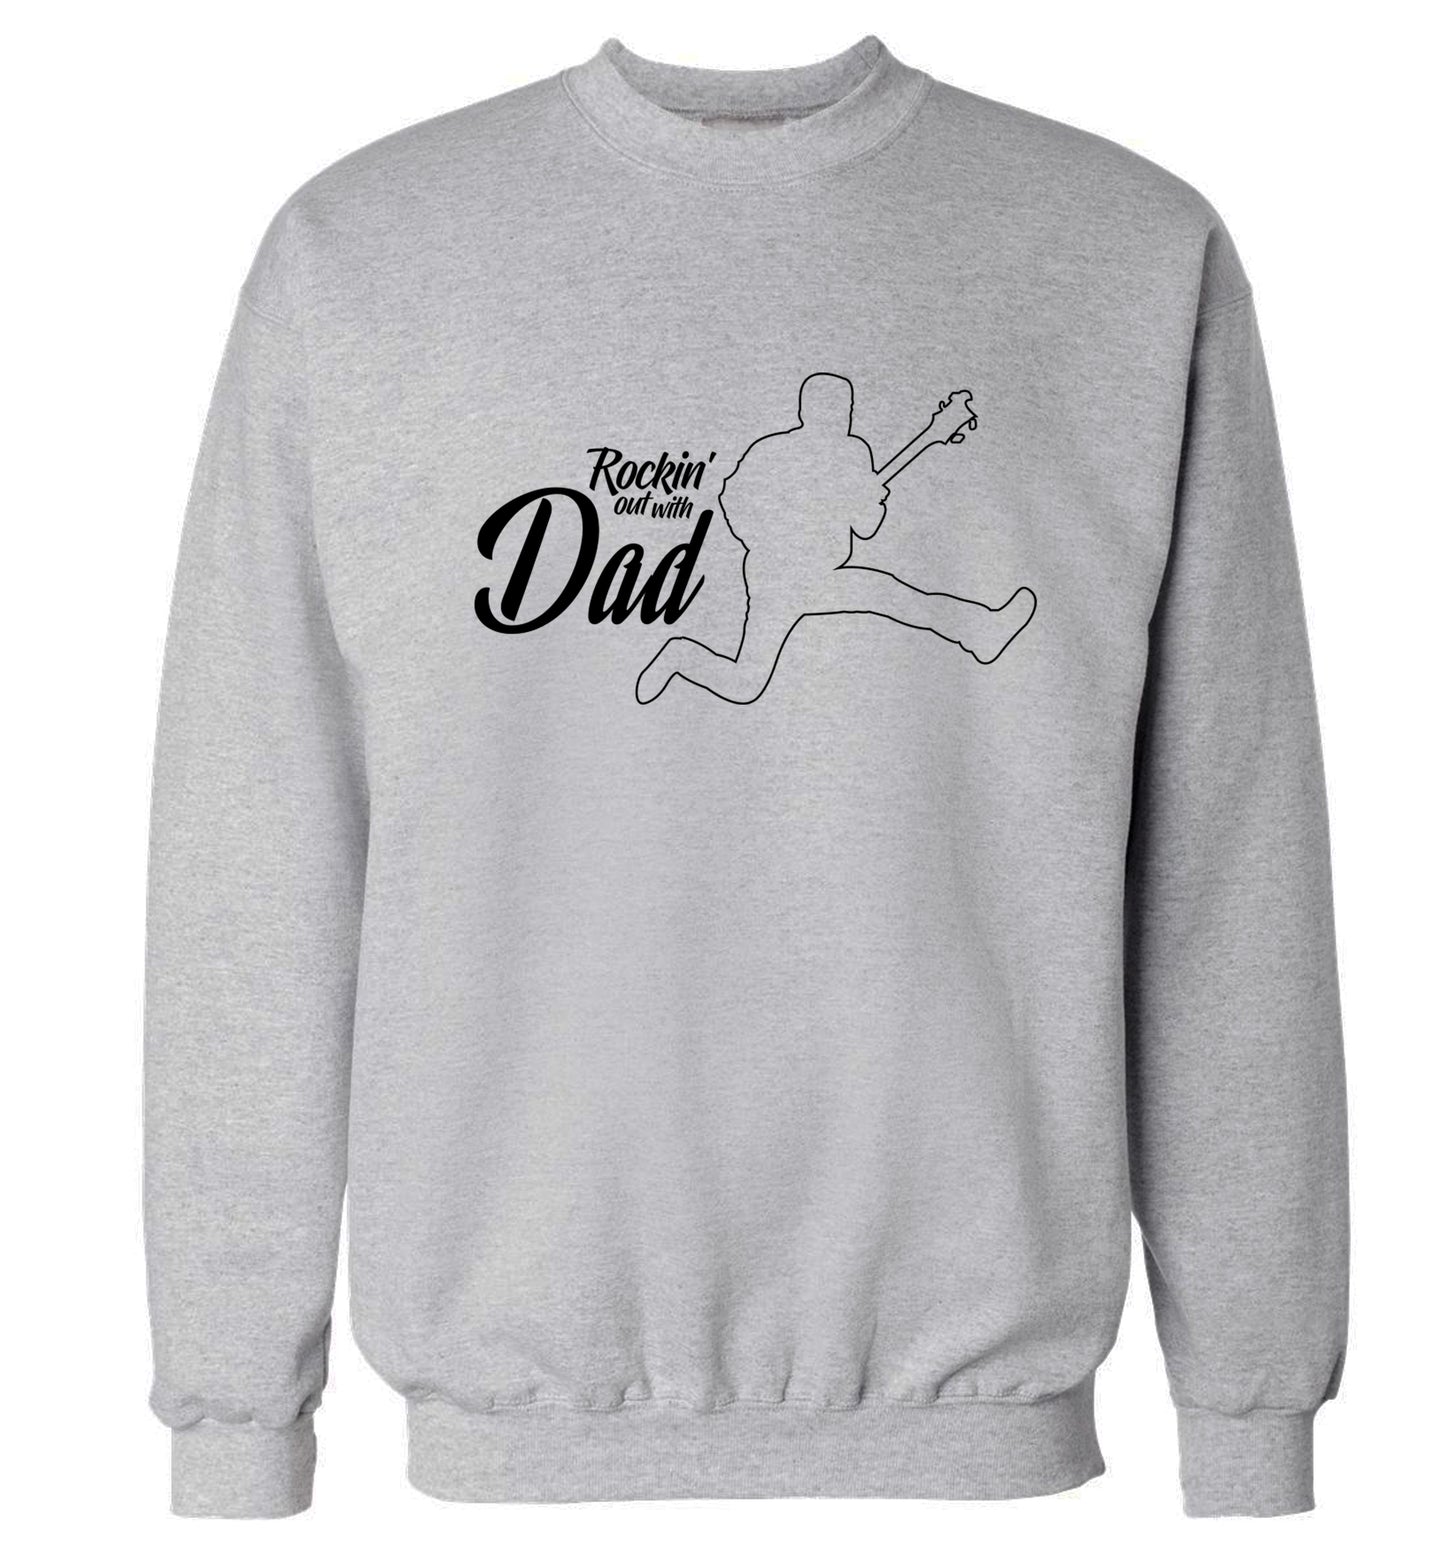 Rockin out with dad Adult's unisex grey Sweater 2XL